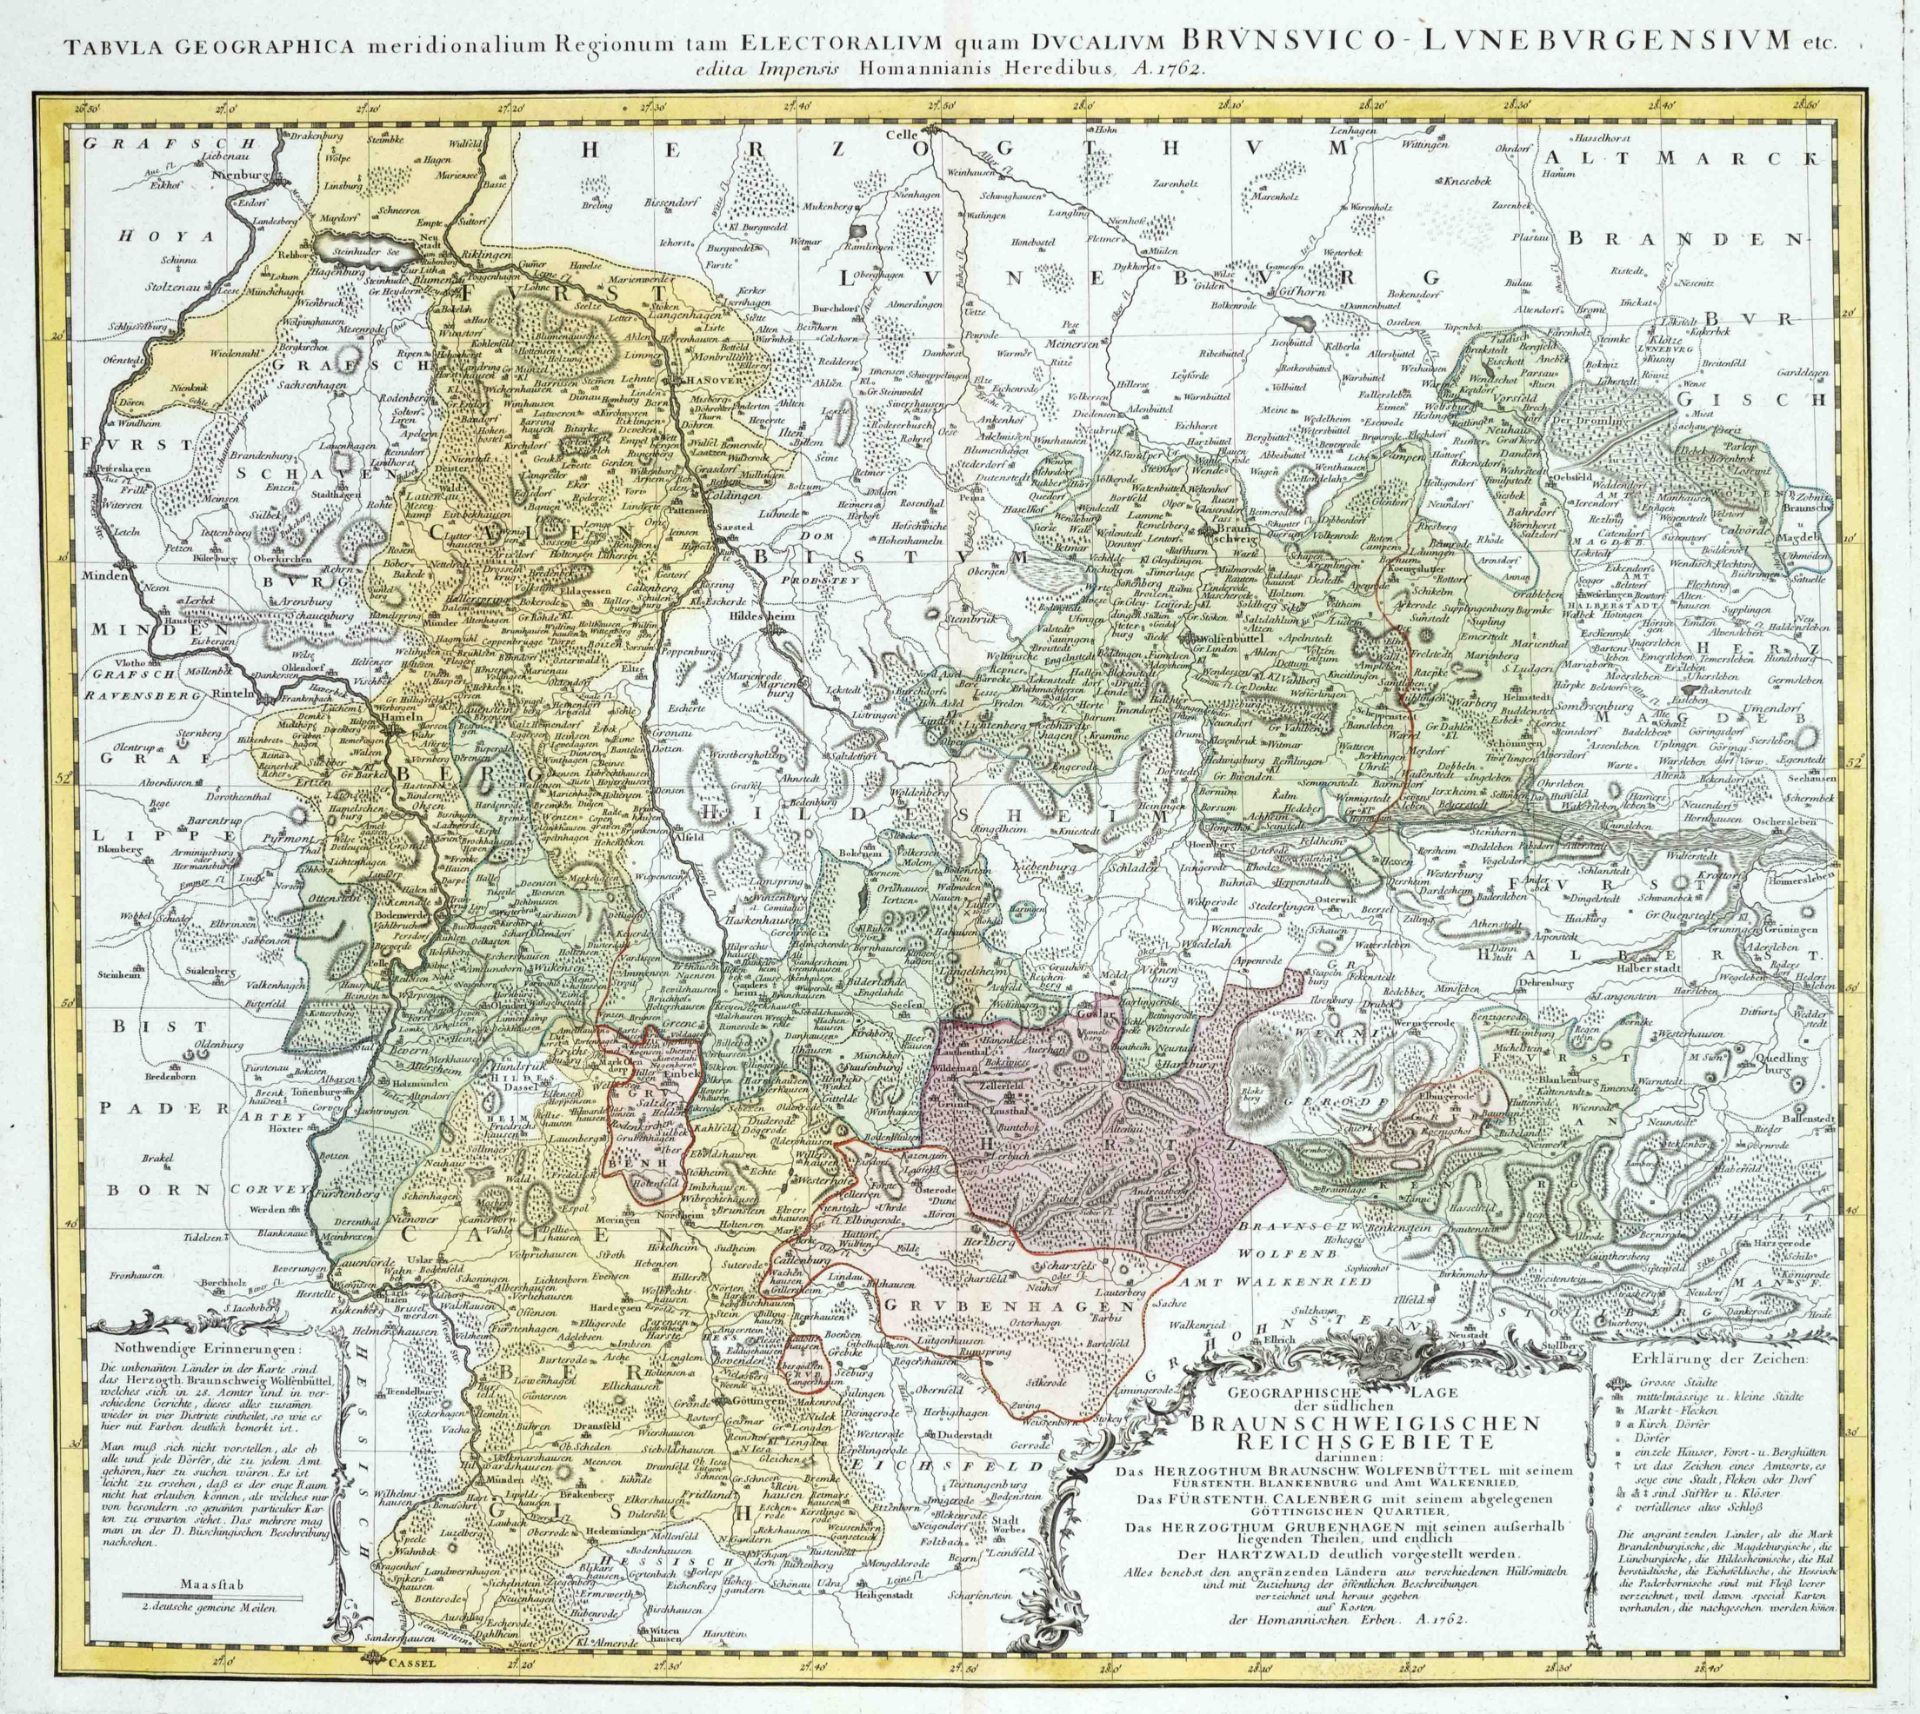 Historical map of the Imperial Territories of Brunswick ''Tabula geographica (...) Brunsvico